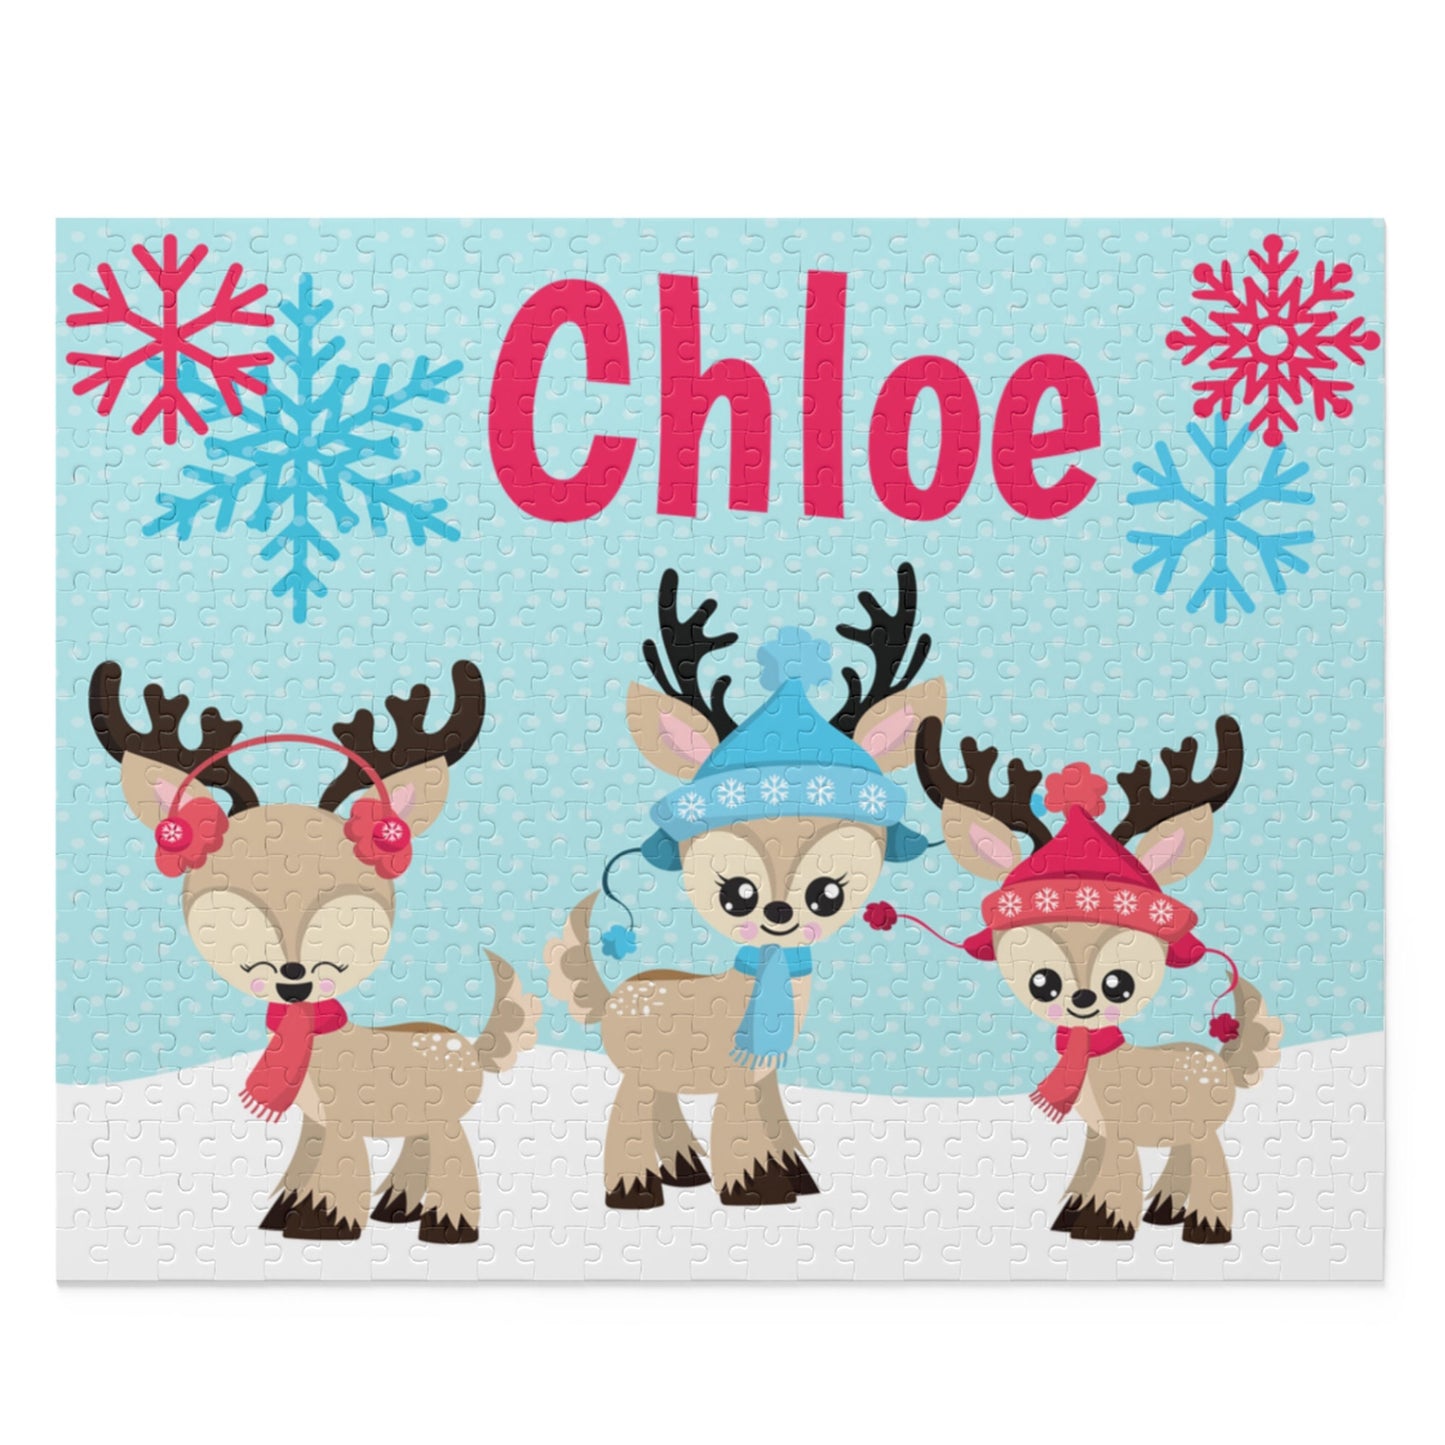 Personalized Gift for Kids, Personalized Christmas Puzzle, Reindeer Christmas Puzzle, Holiday Gift for Kids, Stocking Stuffers, Kid Gift